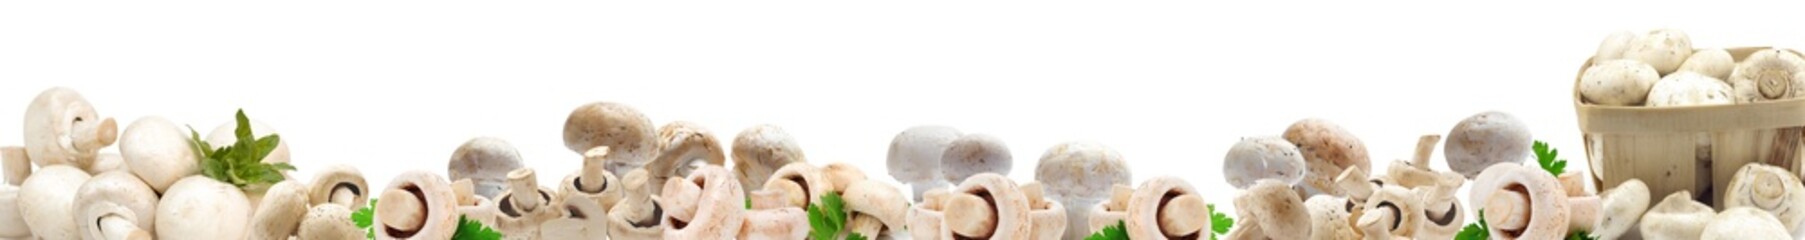 Champignons on a white background